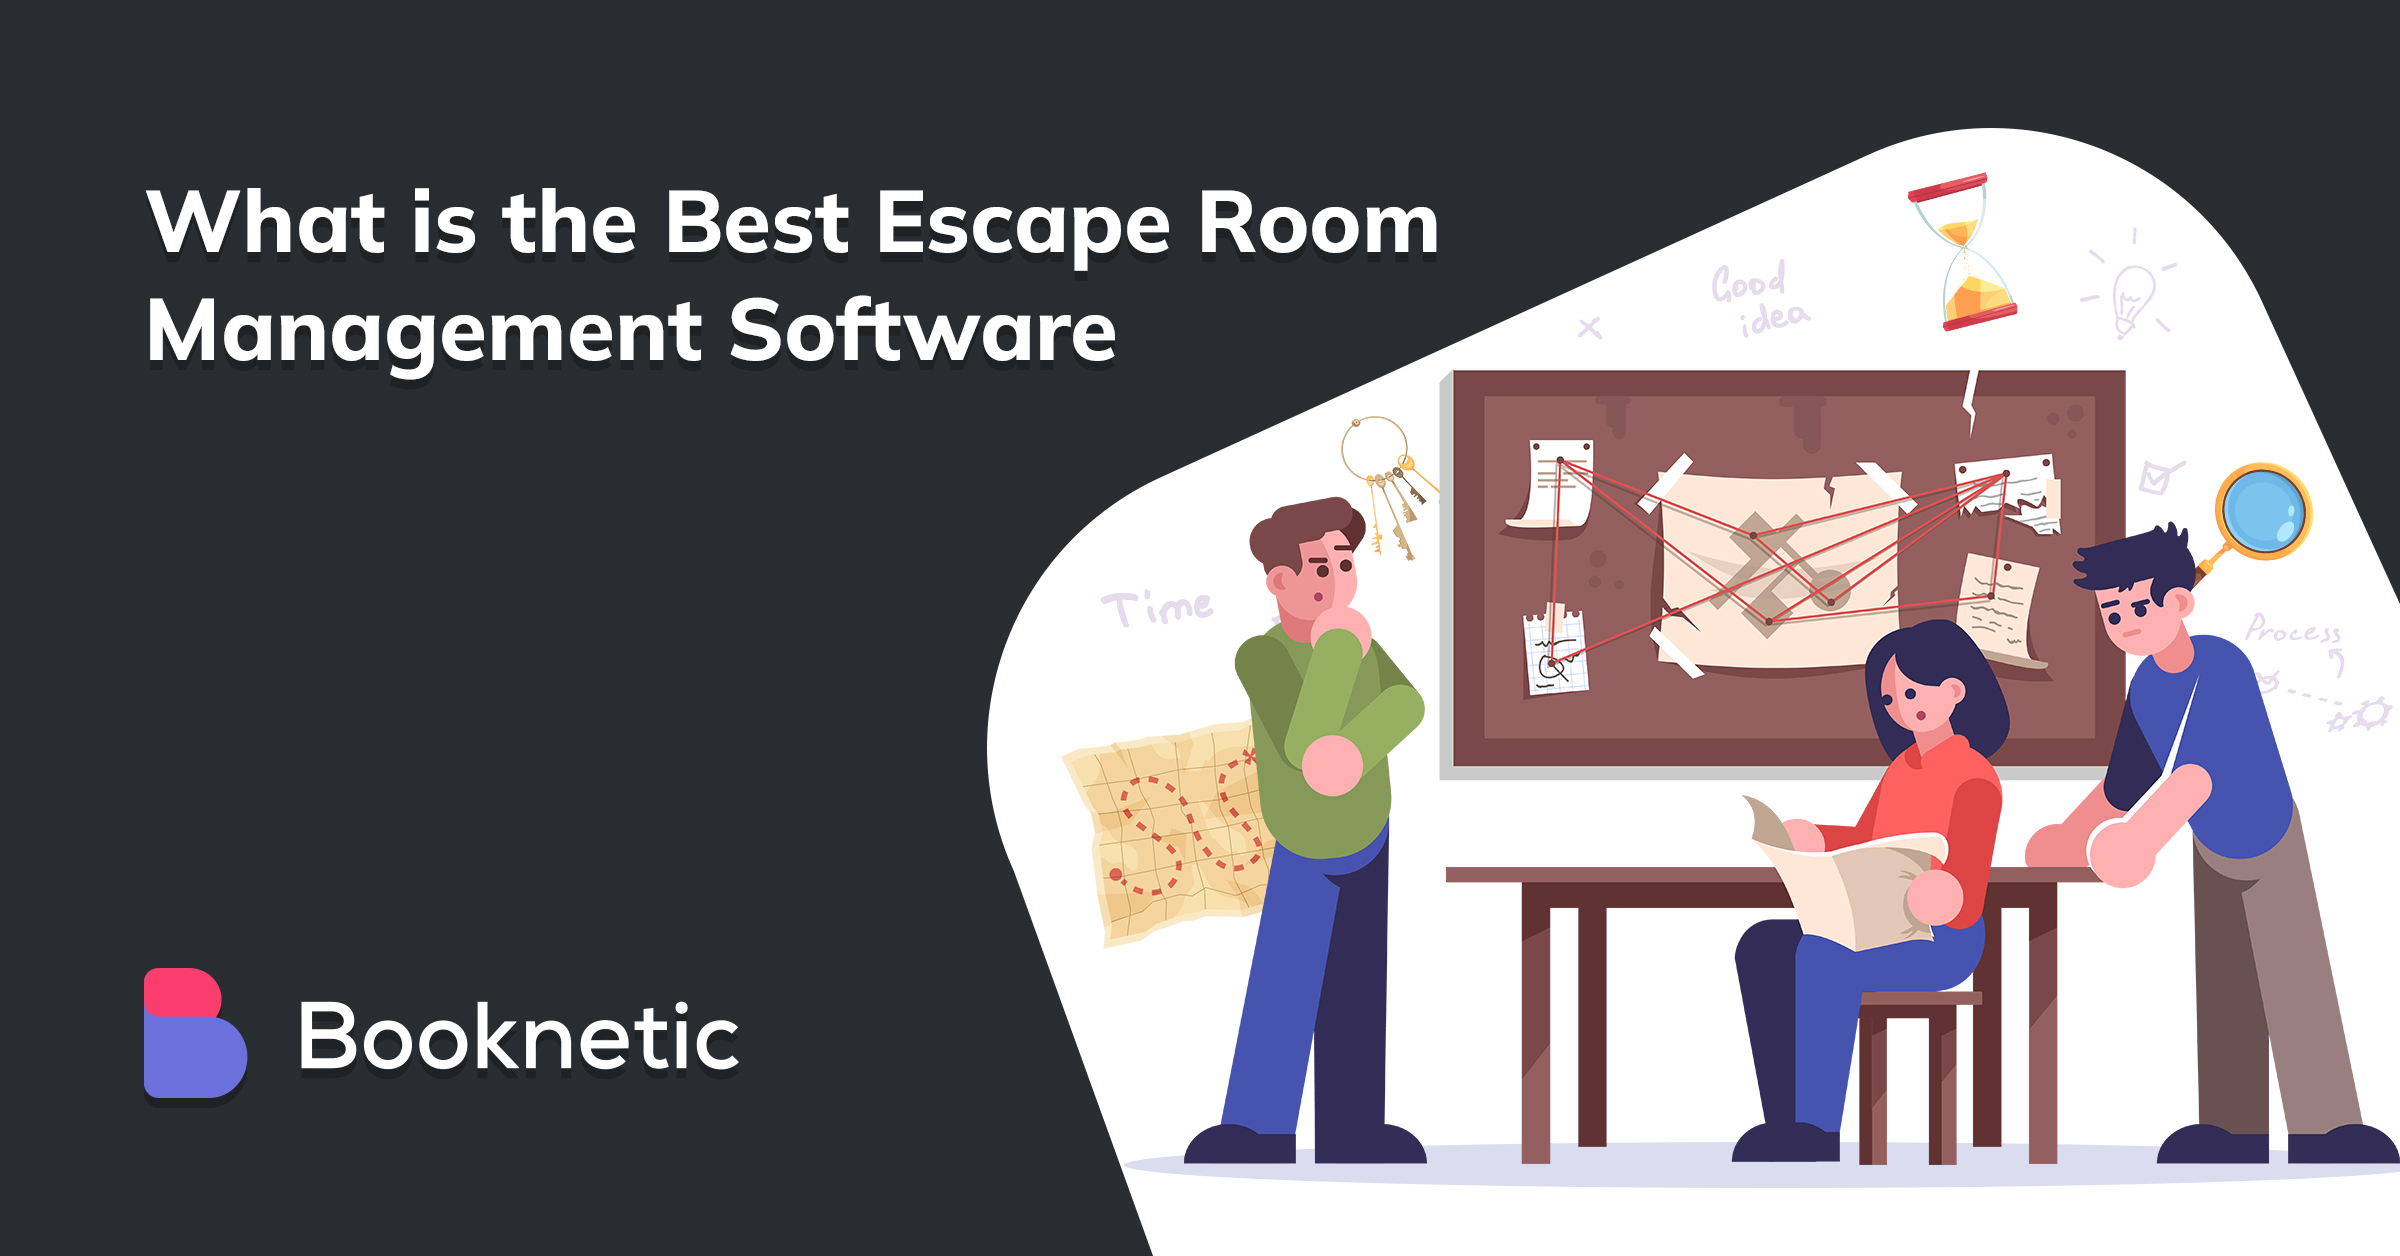 What is the Best Escape Room Management Software?